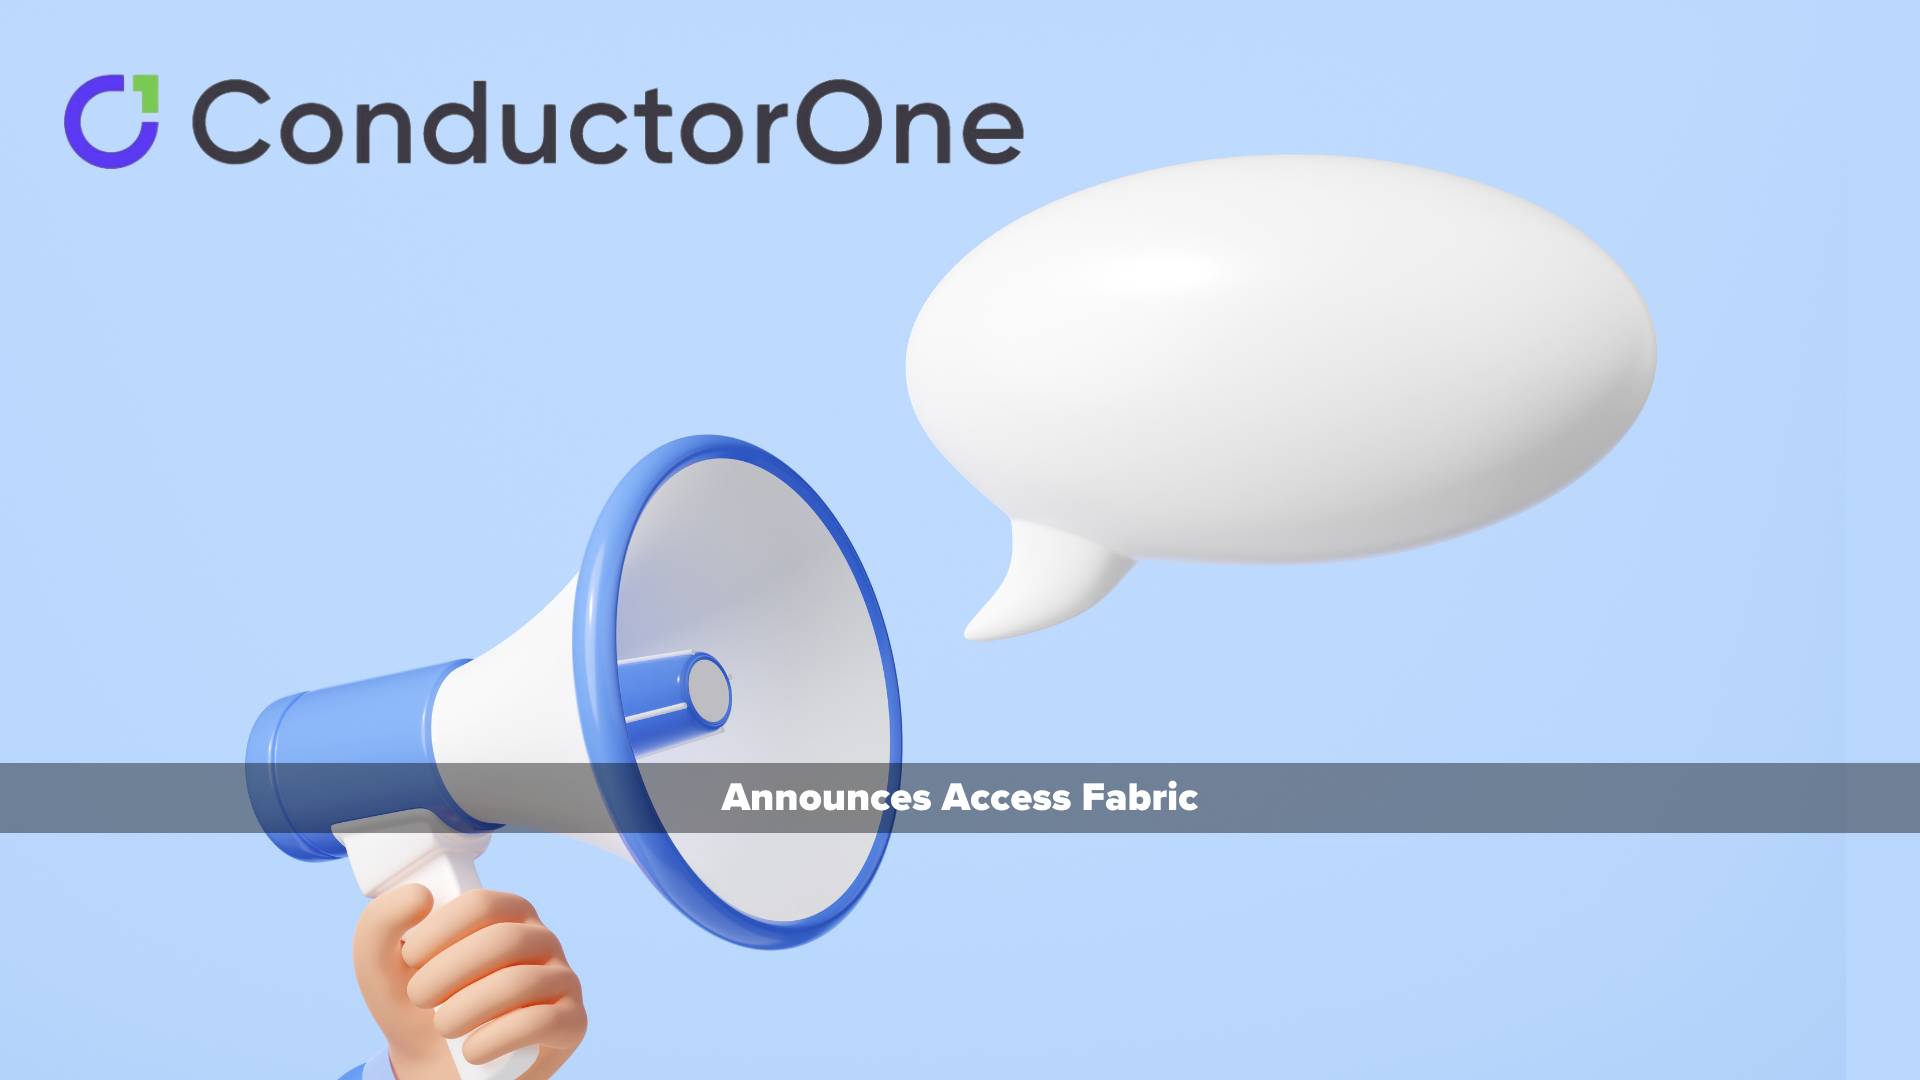 ConductorOne Announces Access Fabric to Unify Access Visibility Across Complex Environments